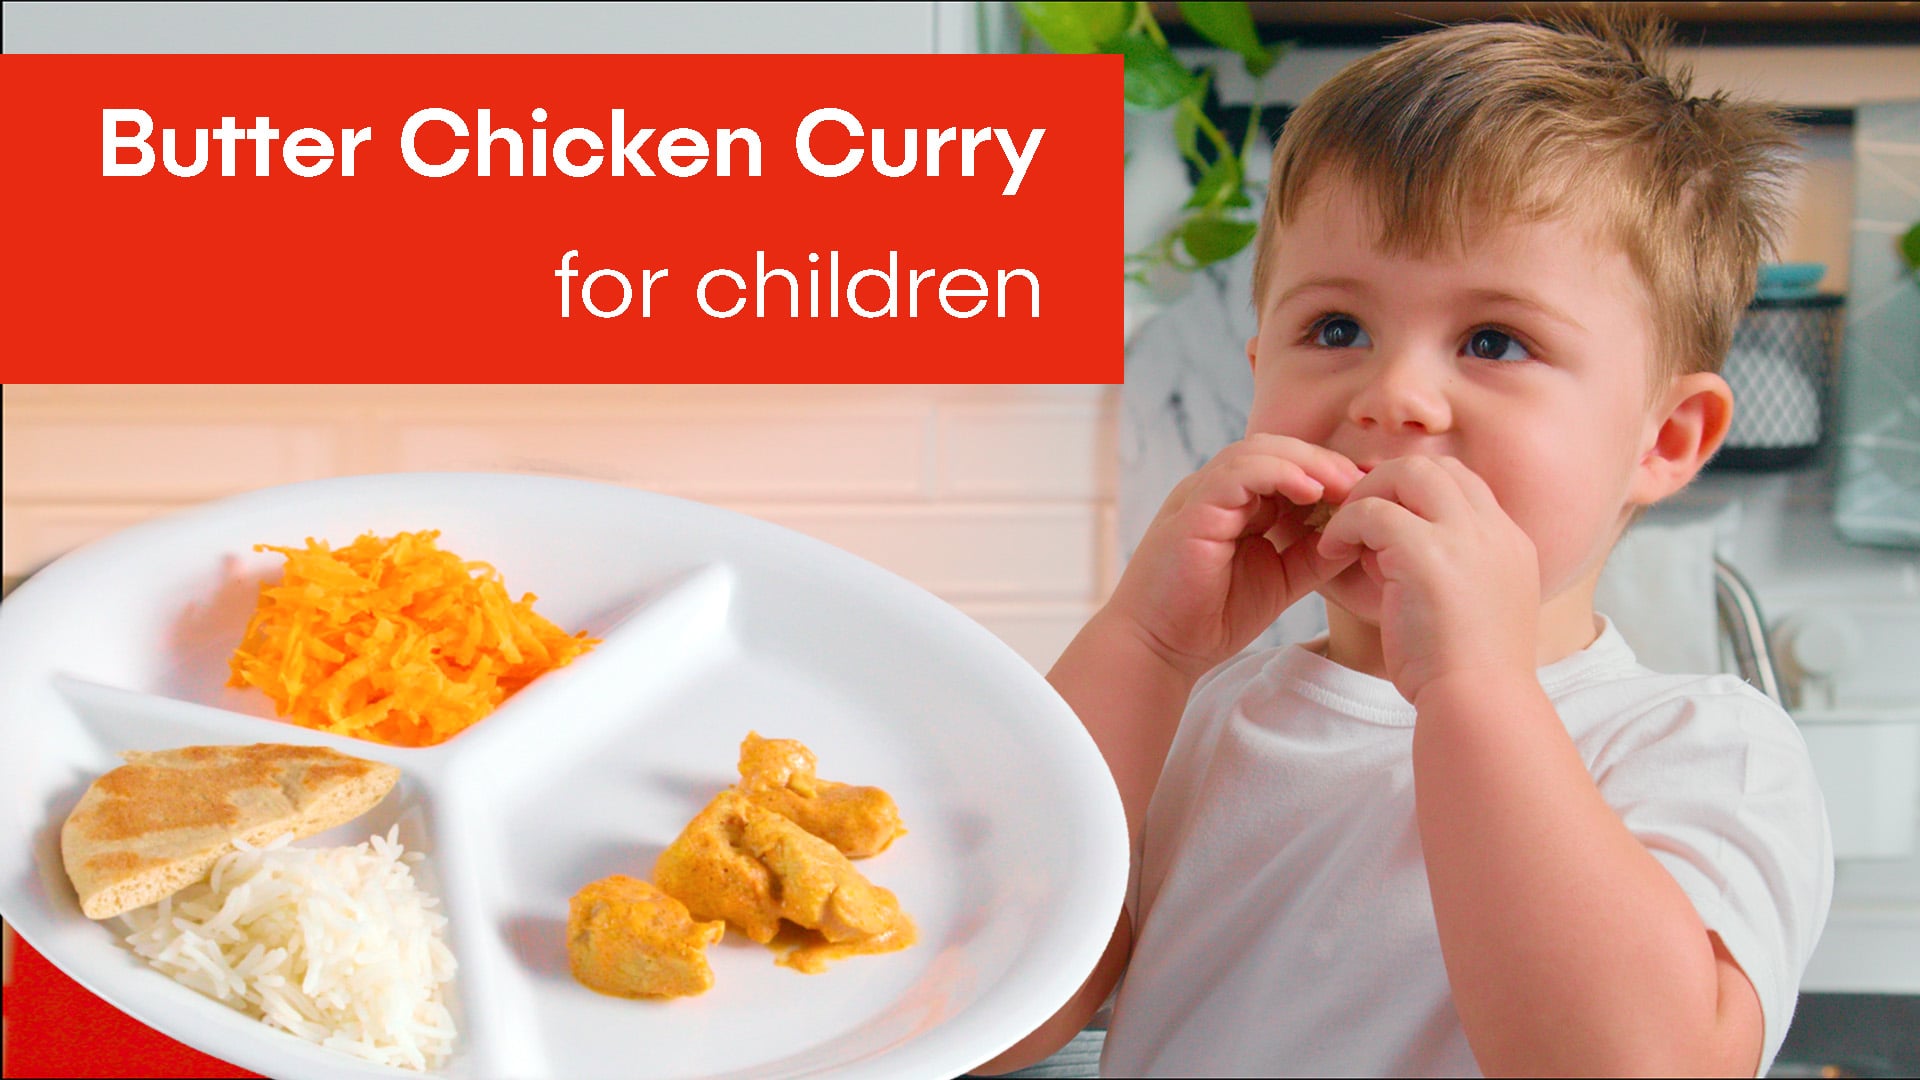 Featured image for “Cook for Children – Butter Chicken Curry – Social Video”